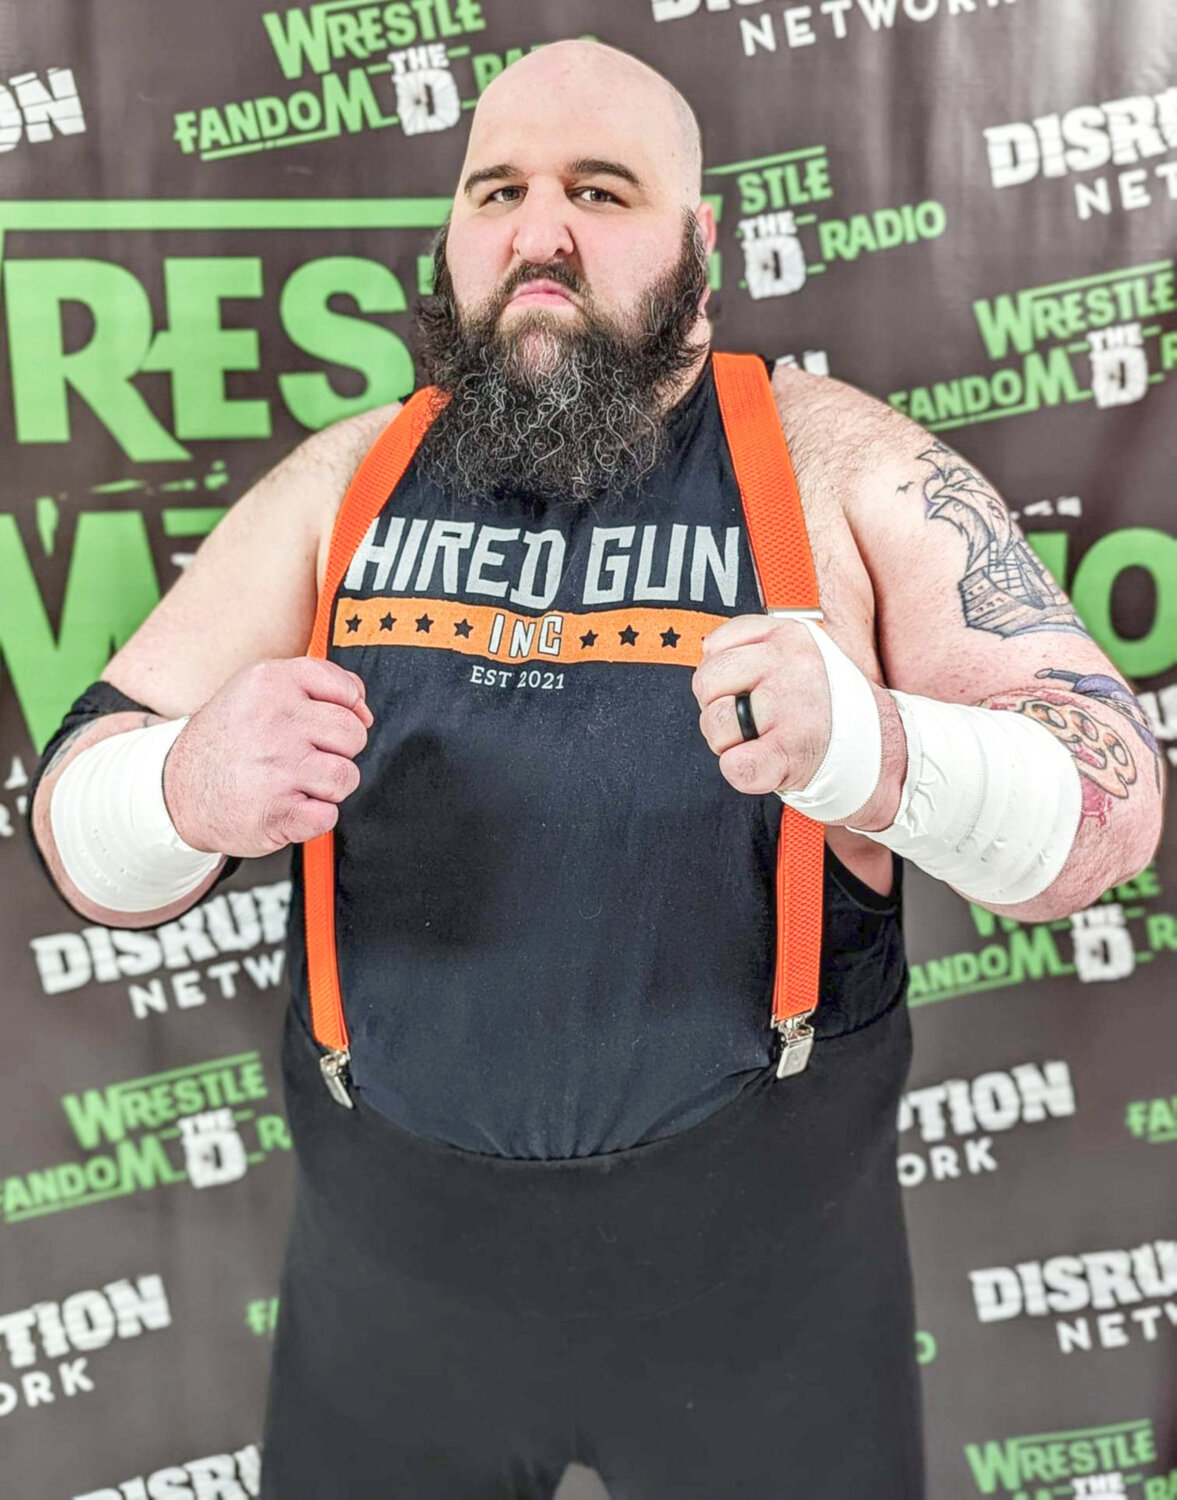 Oneida native pro wrestler Brute VanSlyke returns to his hometown for Nu Pro Wrestling’s Clash at the Kallet at 6 p.m. May 27 at the Kallet Civic Center. Tickets are $15 or $7 for kids 10 and younger.